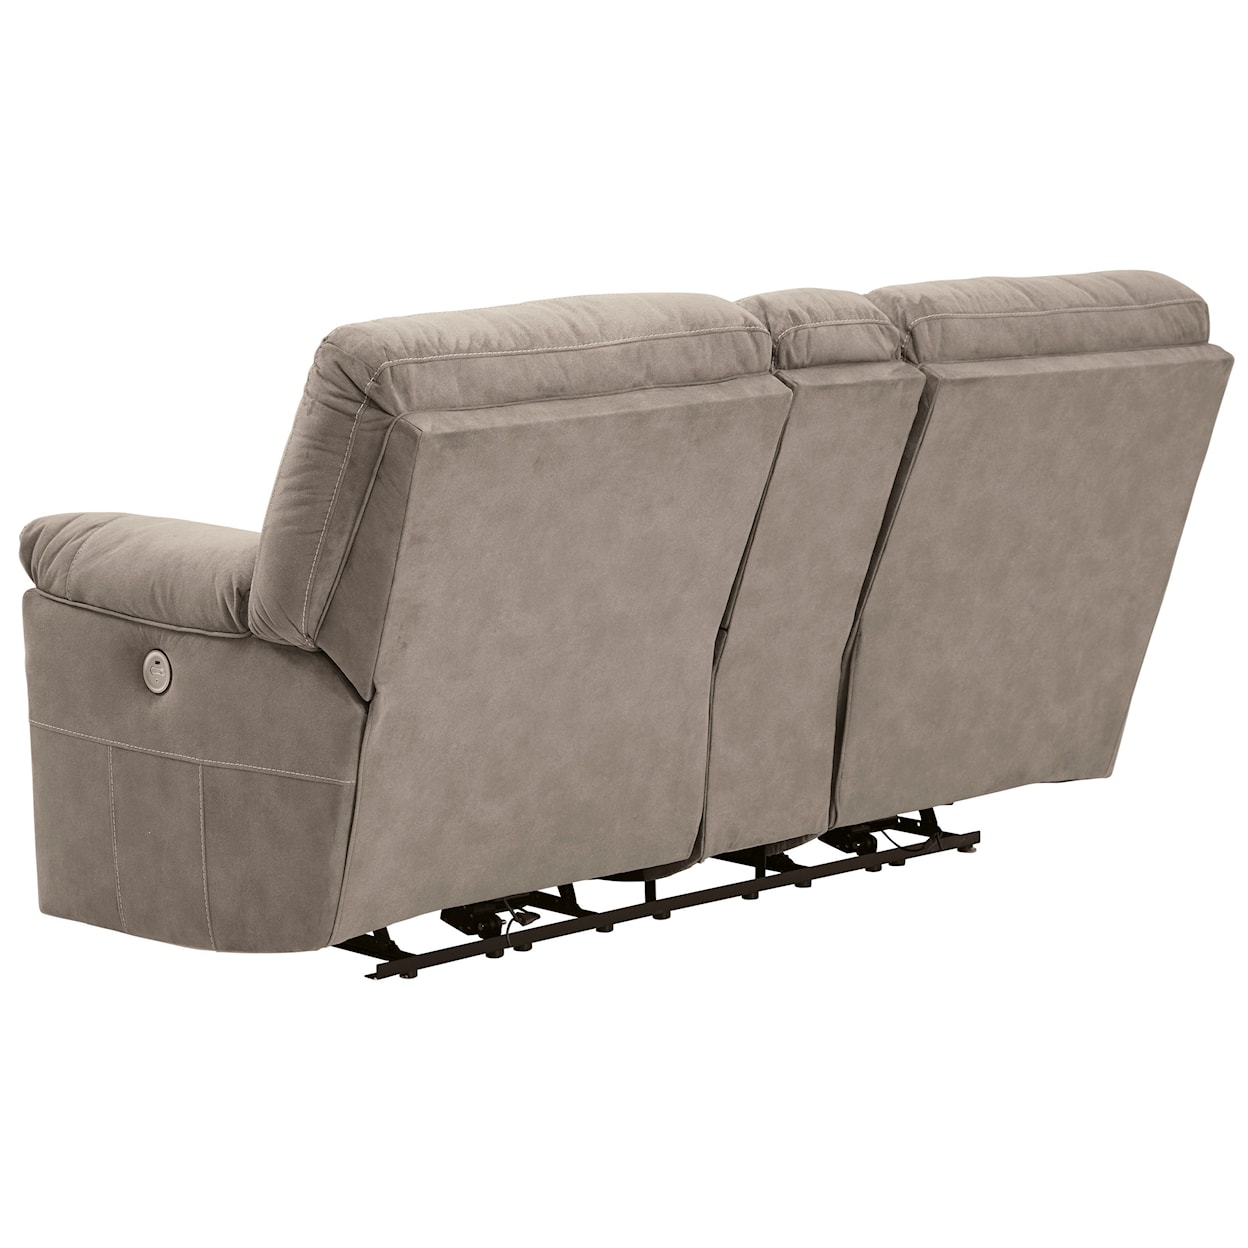 Benchcraft Cavalcade Double Reclining Power Loveseat with Console